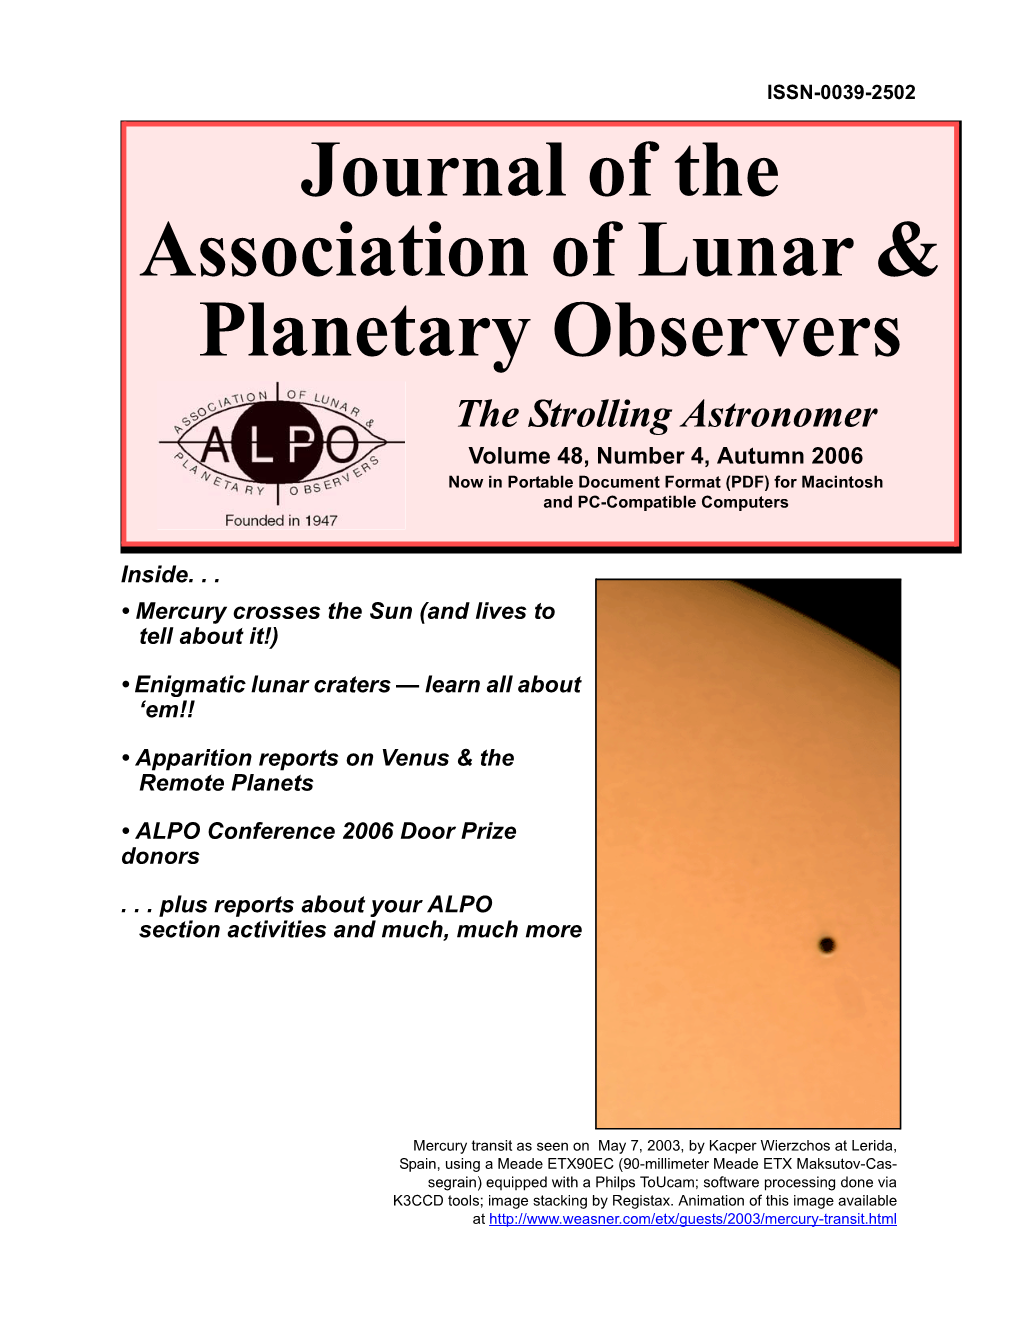 Journal of the Association of Lunar & Planetary Observers